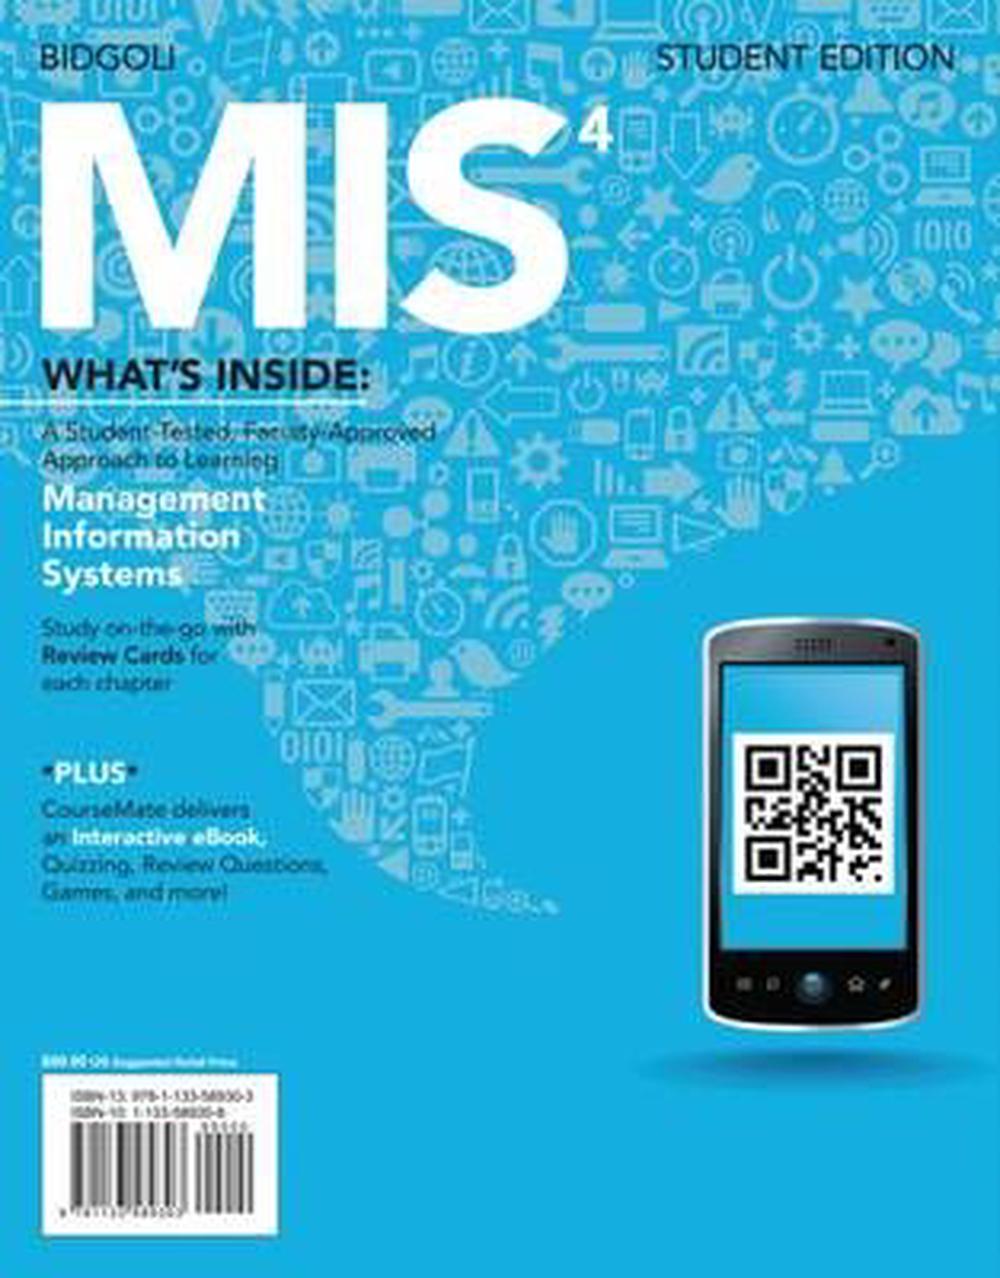 MIS 4 (with Coursemate Printed Access Card) by Hossein Bidgoli, Hardcover, 9781133589303 Buy